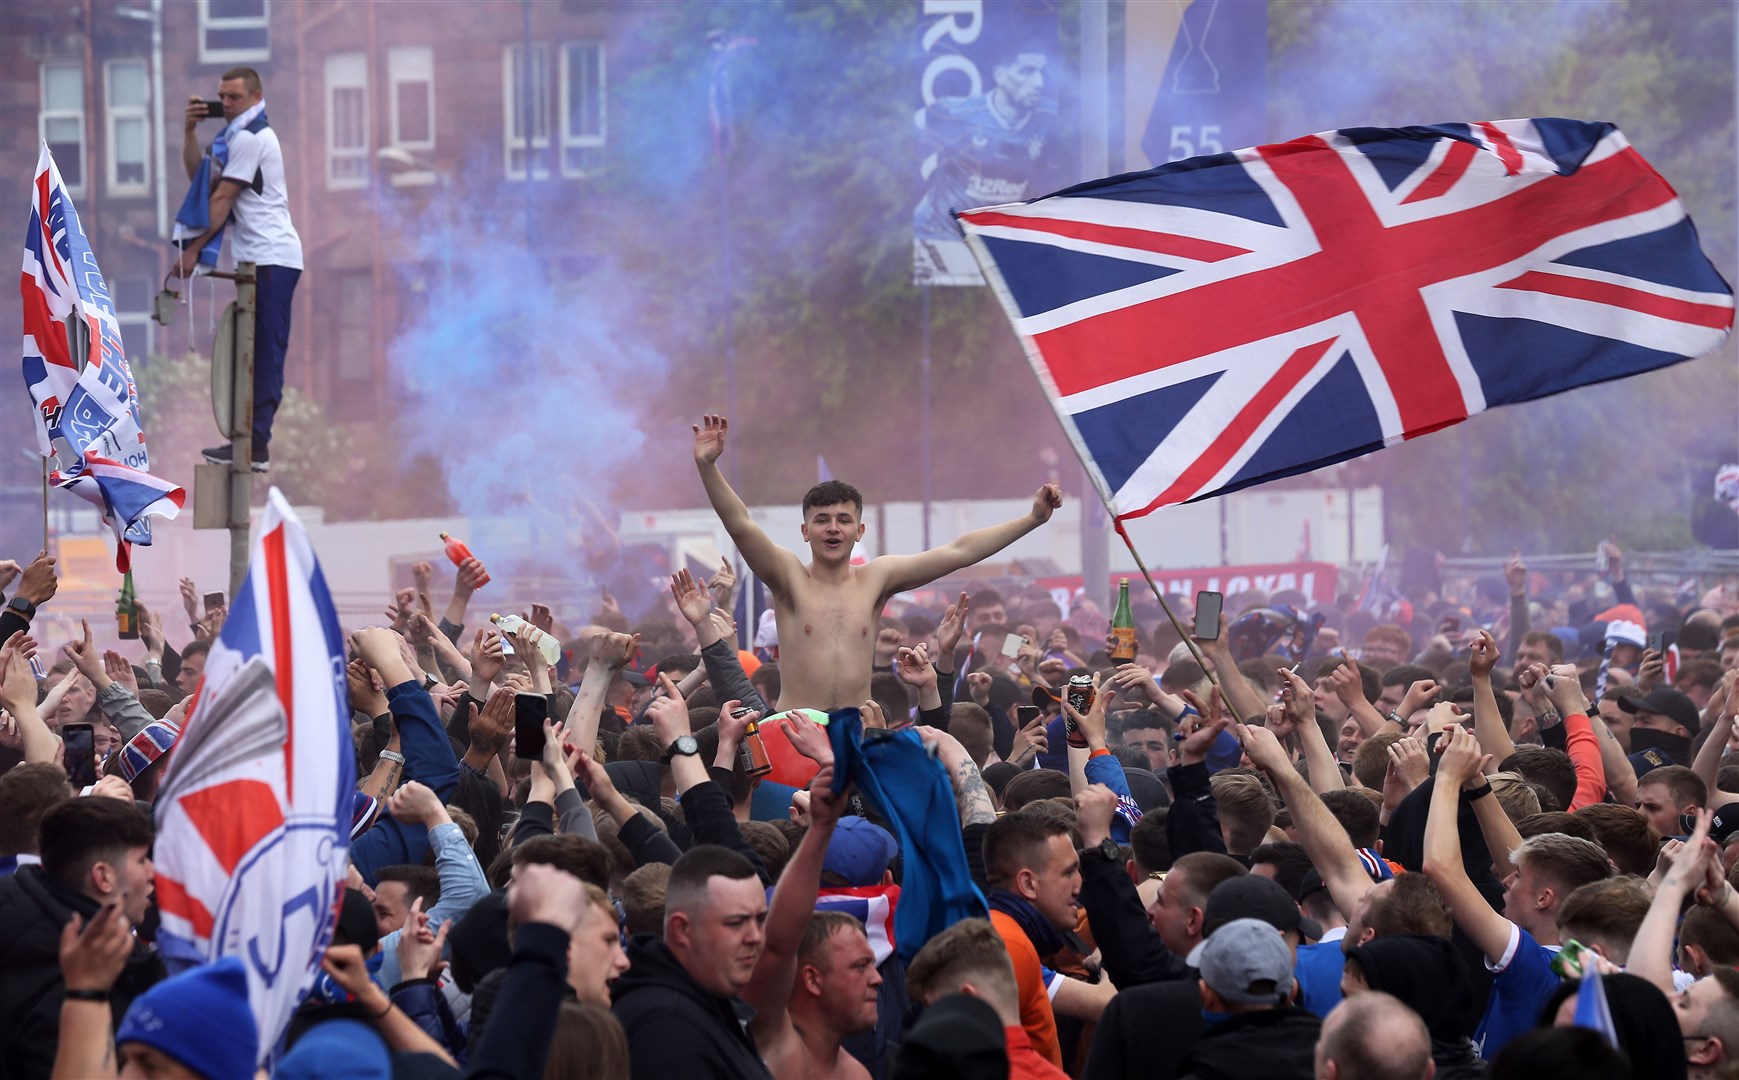 Hundreds of Rangers fans gathered outside Ibrox during the game (Robert Perry/PA)